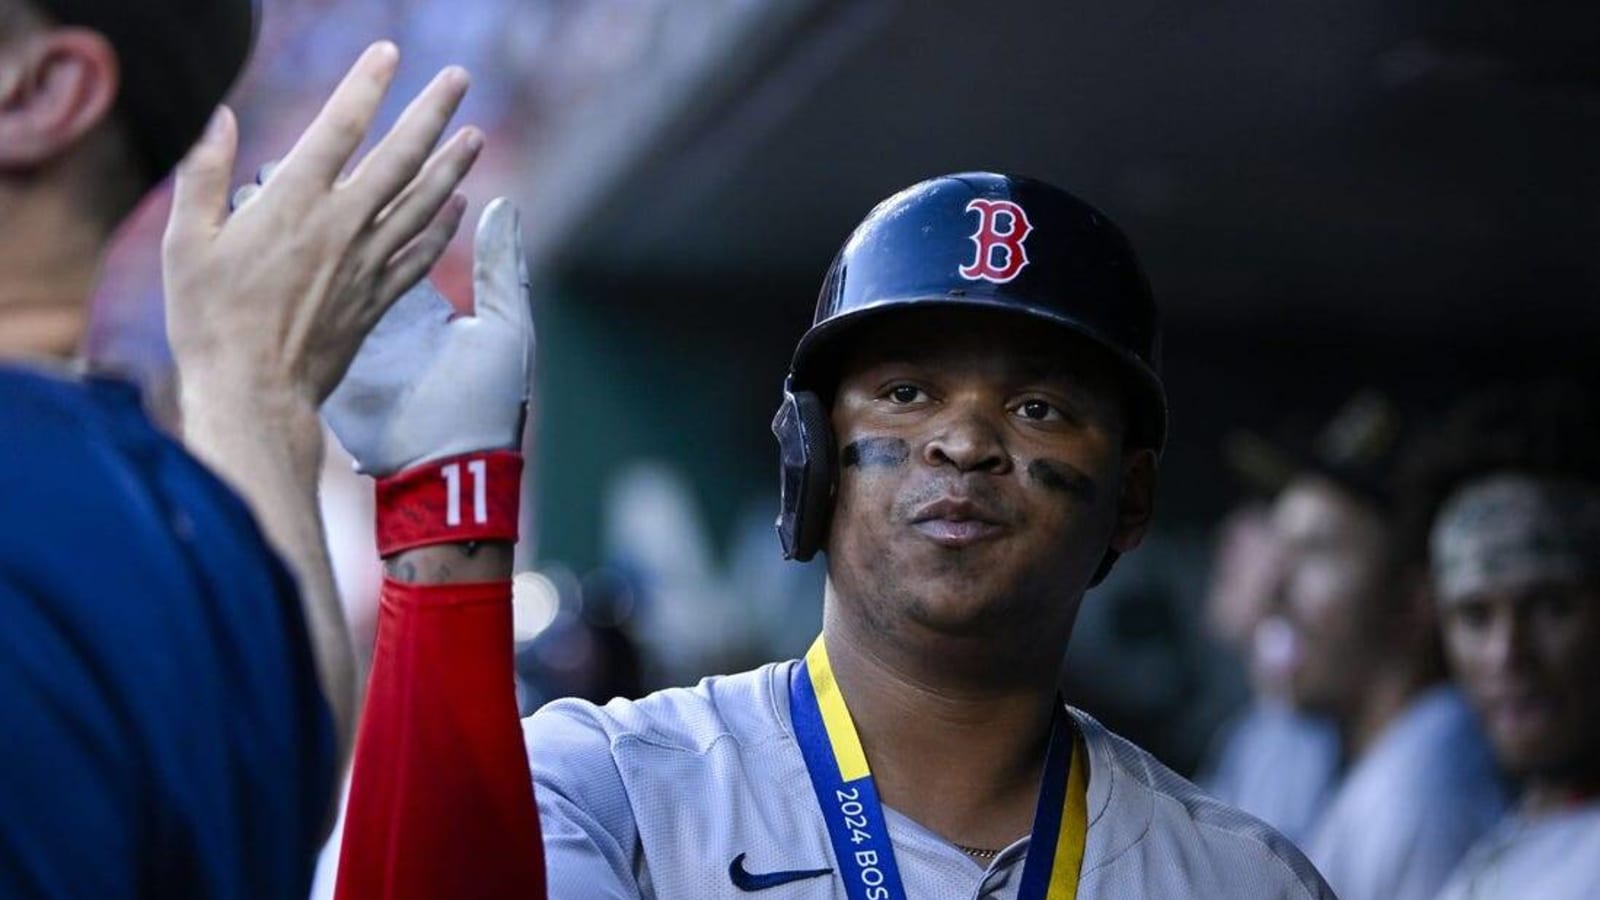 Rafael Devers homers in 6th straight game, sets Red Sox record